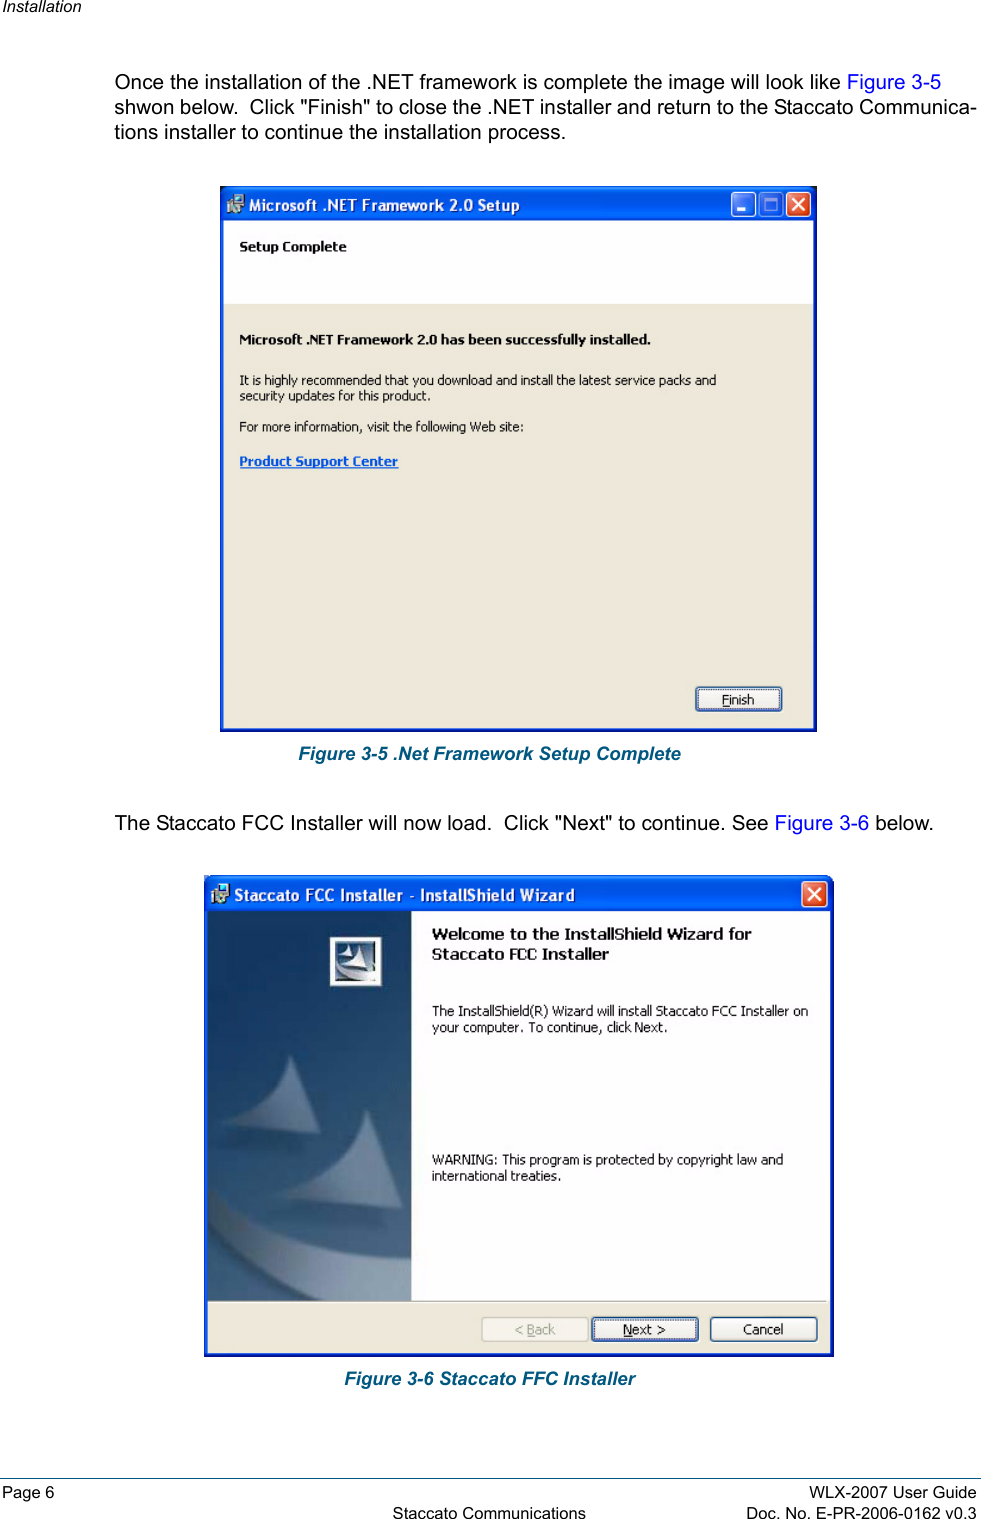 InstallationPage 6 WLX-2007 User GuideStaccato Communications Doc. No. E-PR-2006-0162 v0.3Once the installation of the .NET framework is complete the image will look like Figure 3-5 shwon below.  Click &quot;Finish&quot; to close the .NET installer and return to the Staccato Communica-tions installer to continue the installation process.Figure 3-5 .Net Framework Setup CompleteThe Staccato FCC Installer will now load.  Click &quot;Next&quot; to continue. See Figure 3-6 below.Figure 3-6 Staccato FFC Installer